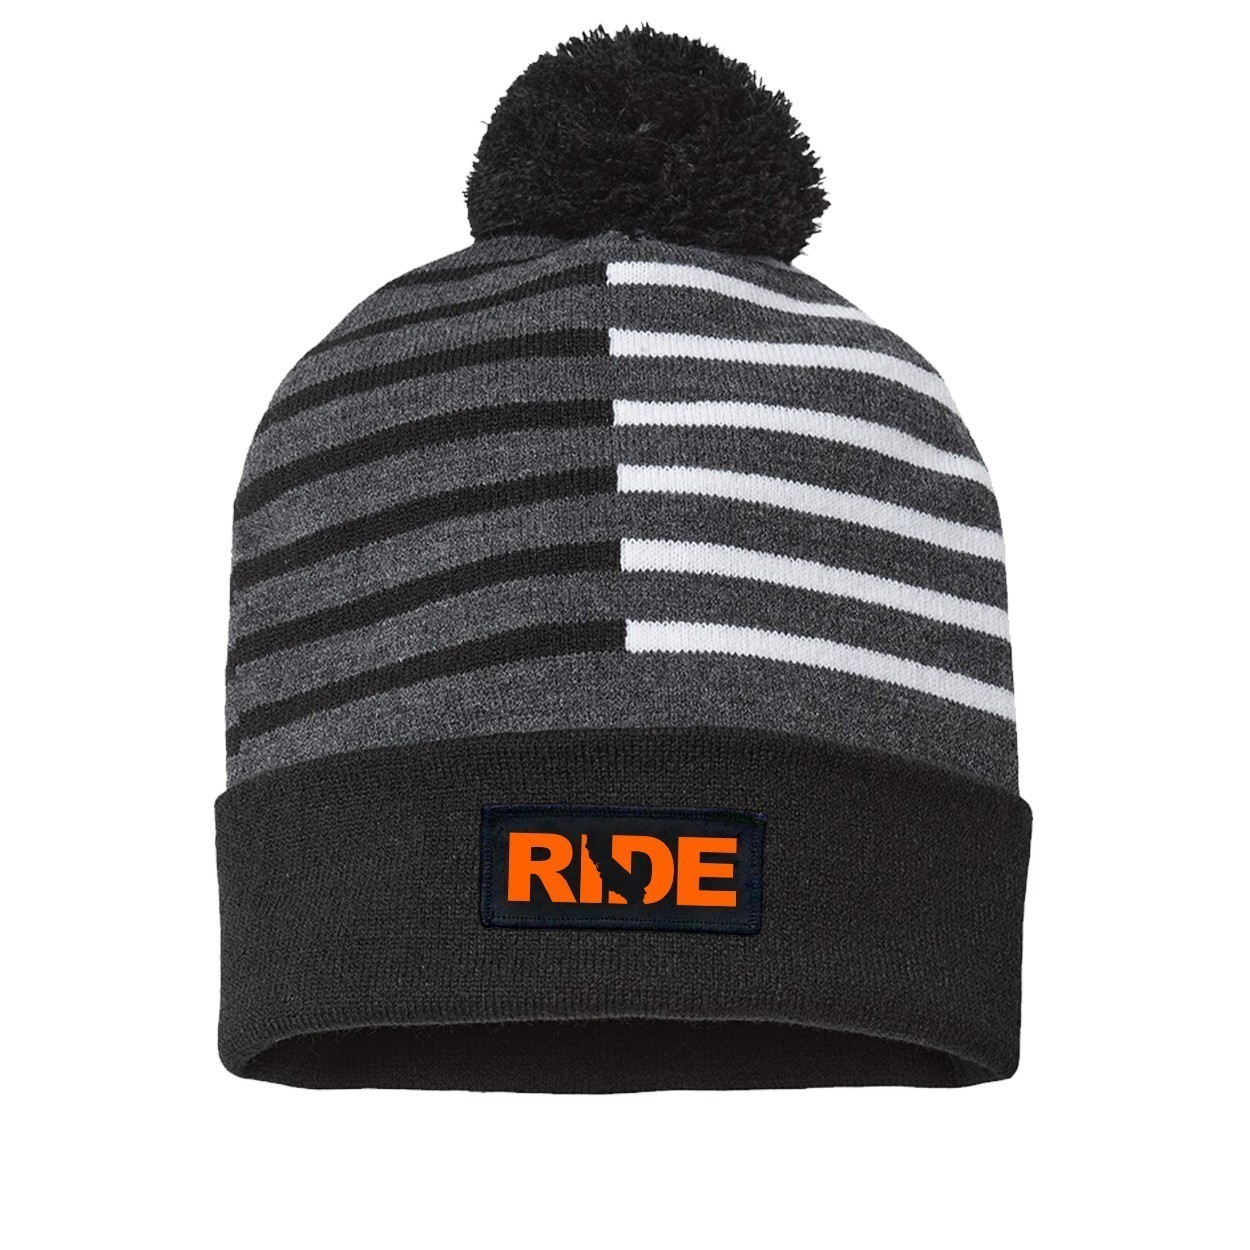 Ride California Night Out Woven Patch Roll Up Pom Knit Beanie Half Color Black/White (Orange Logo)